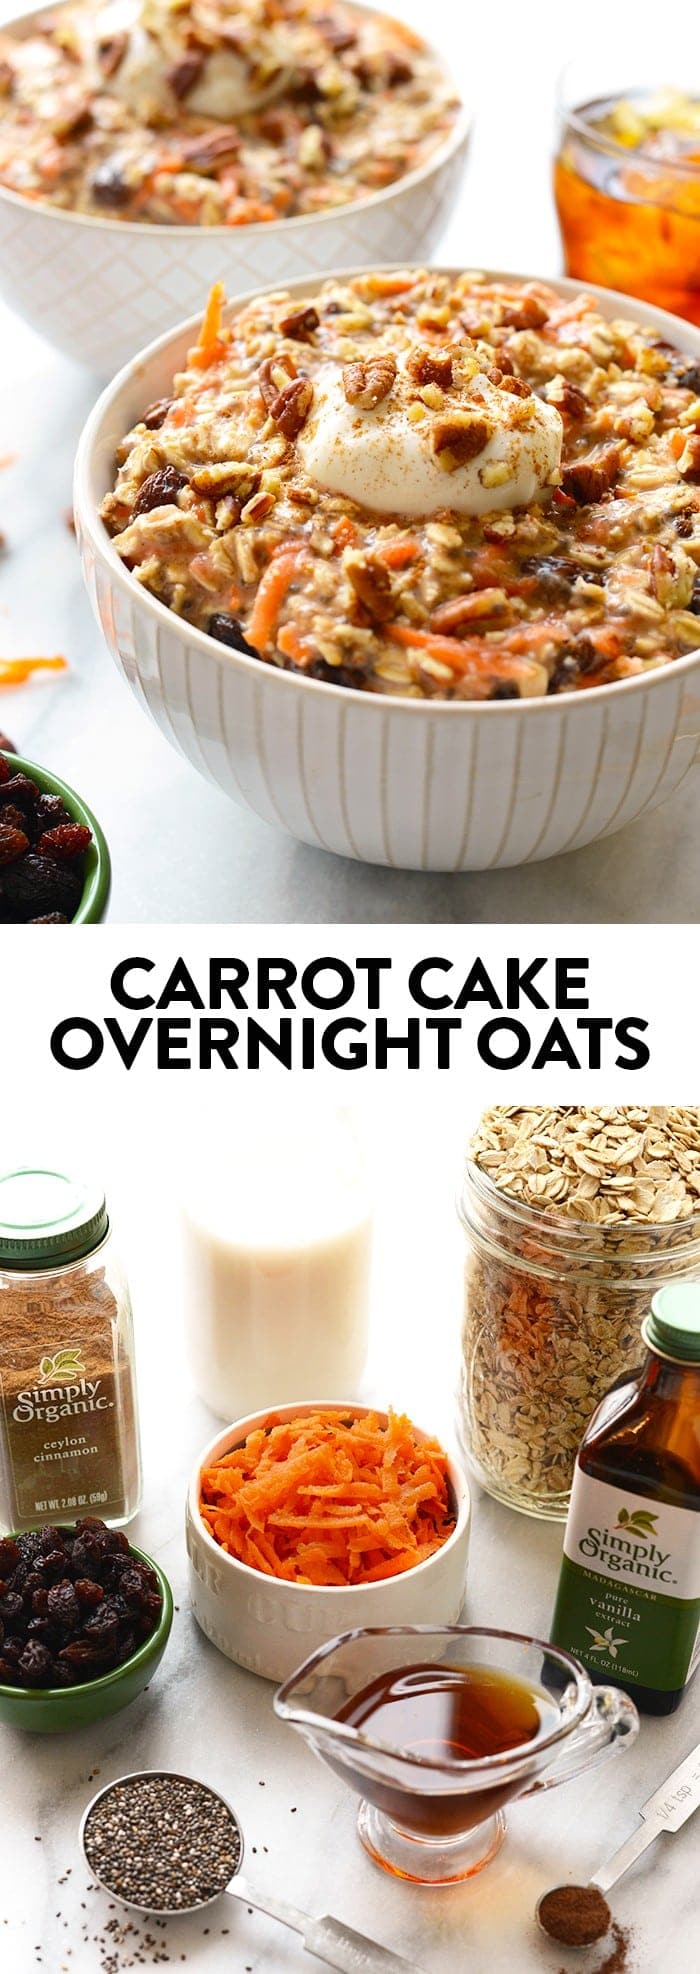 A full serving of veggies at breakfast? SURE WHY NOT! These carrot cake overnight oats will give you just that plus all of the delicious flavors of carrot cake! 